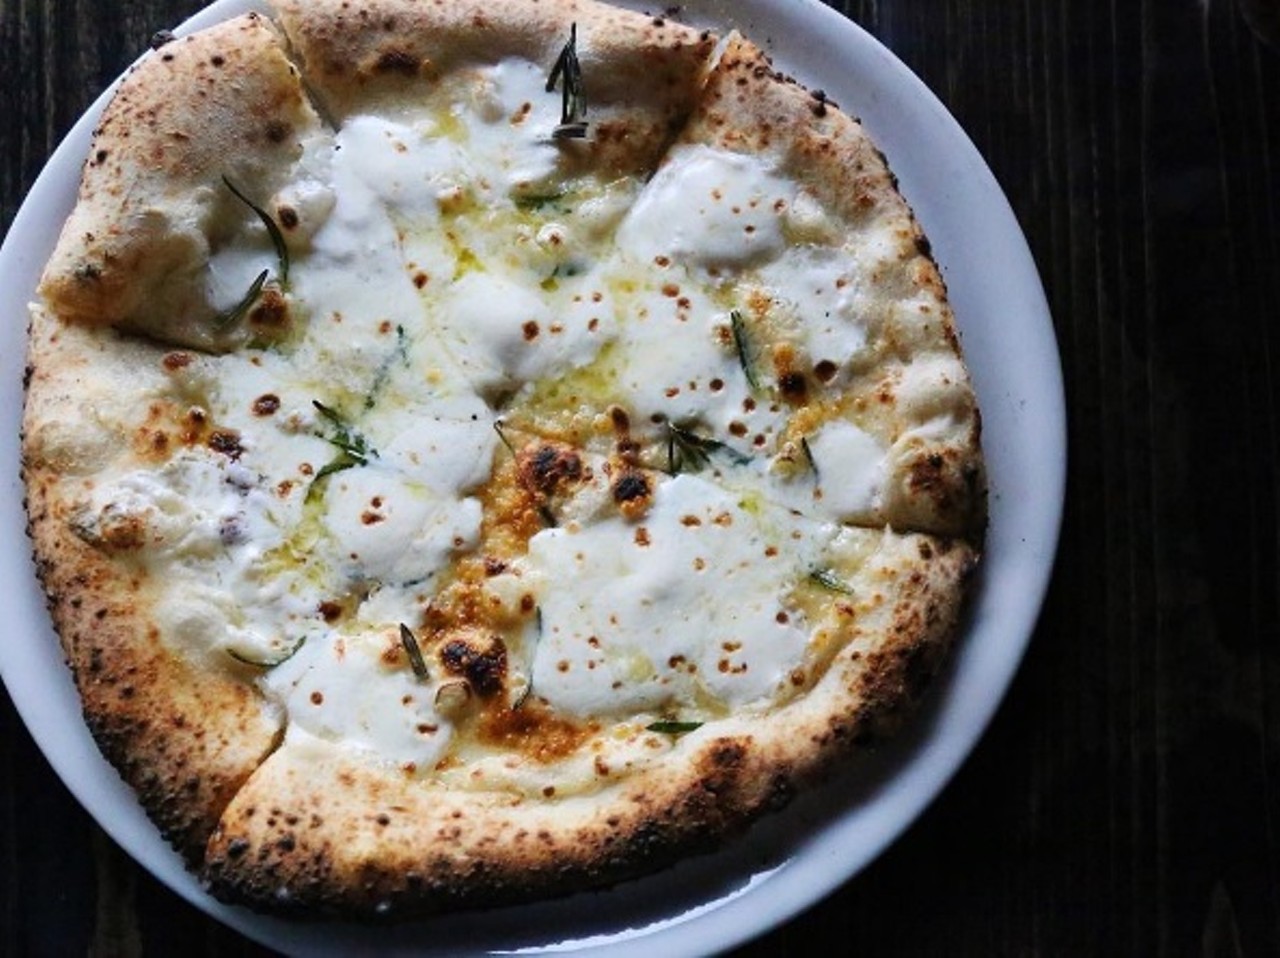 This pizza from Pizzeoli Wood Fired Pizza Napoletana (1928 S. 12th St.,  314-449-1111) includes bechamel sauce, extra virgin olive oil, fresh mozzarella, garlic, rosemary and parmesan. Photo courtesy of Instagram/ feedme_withamanda.